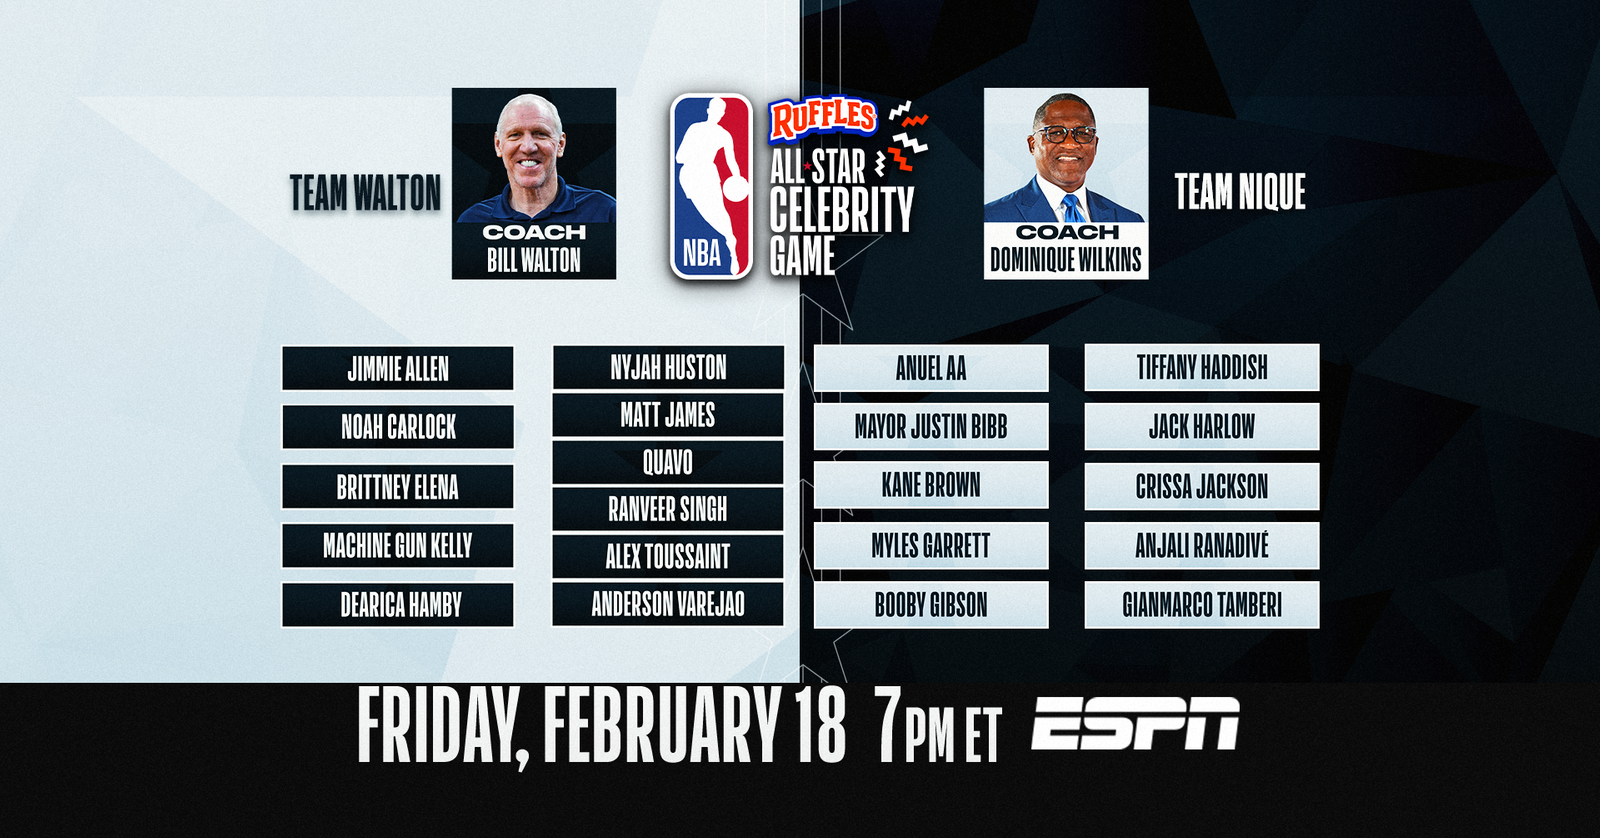 Here Is the Complete 2022 NBA AllStar Celebrity Game Roster